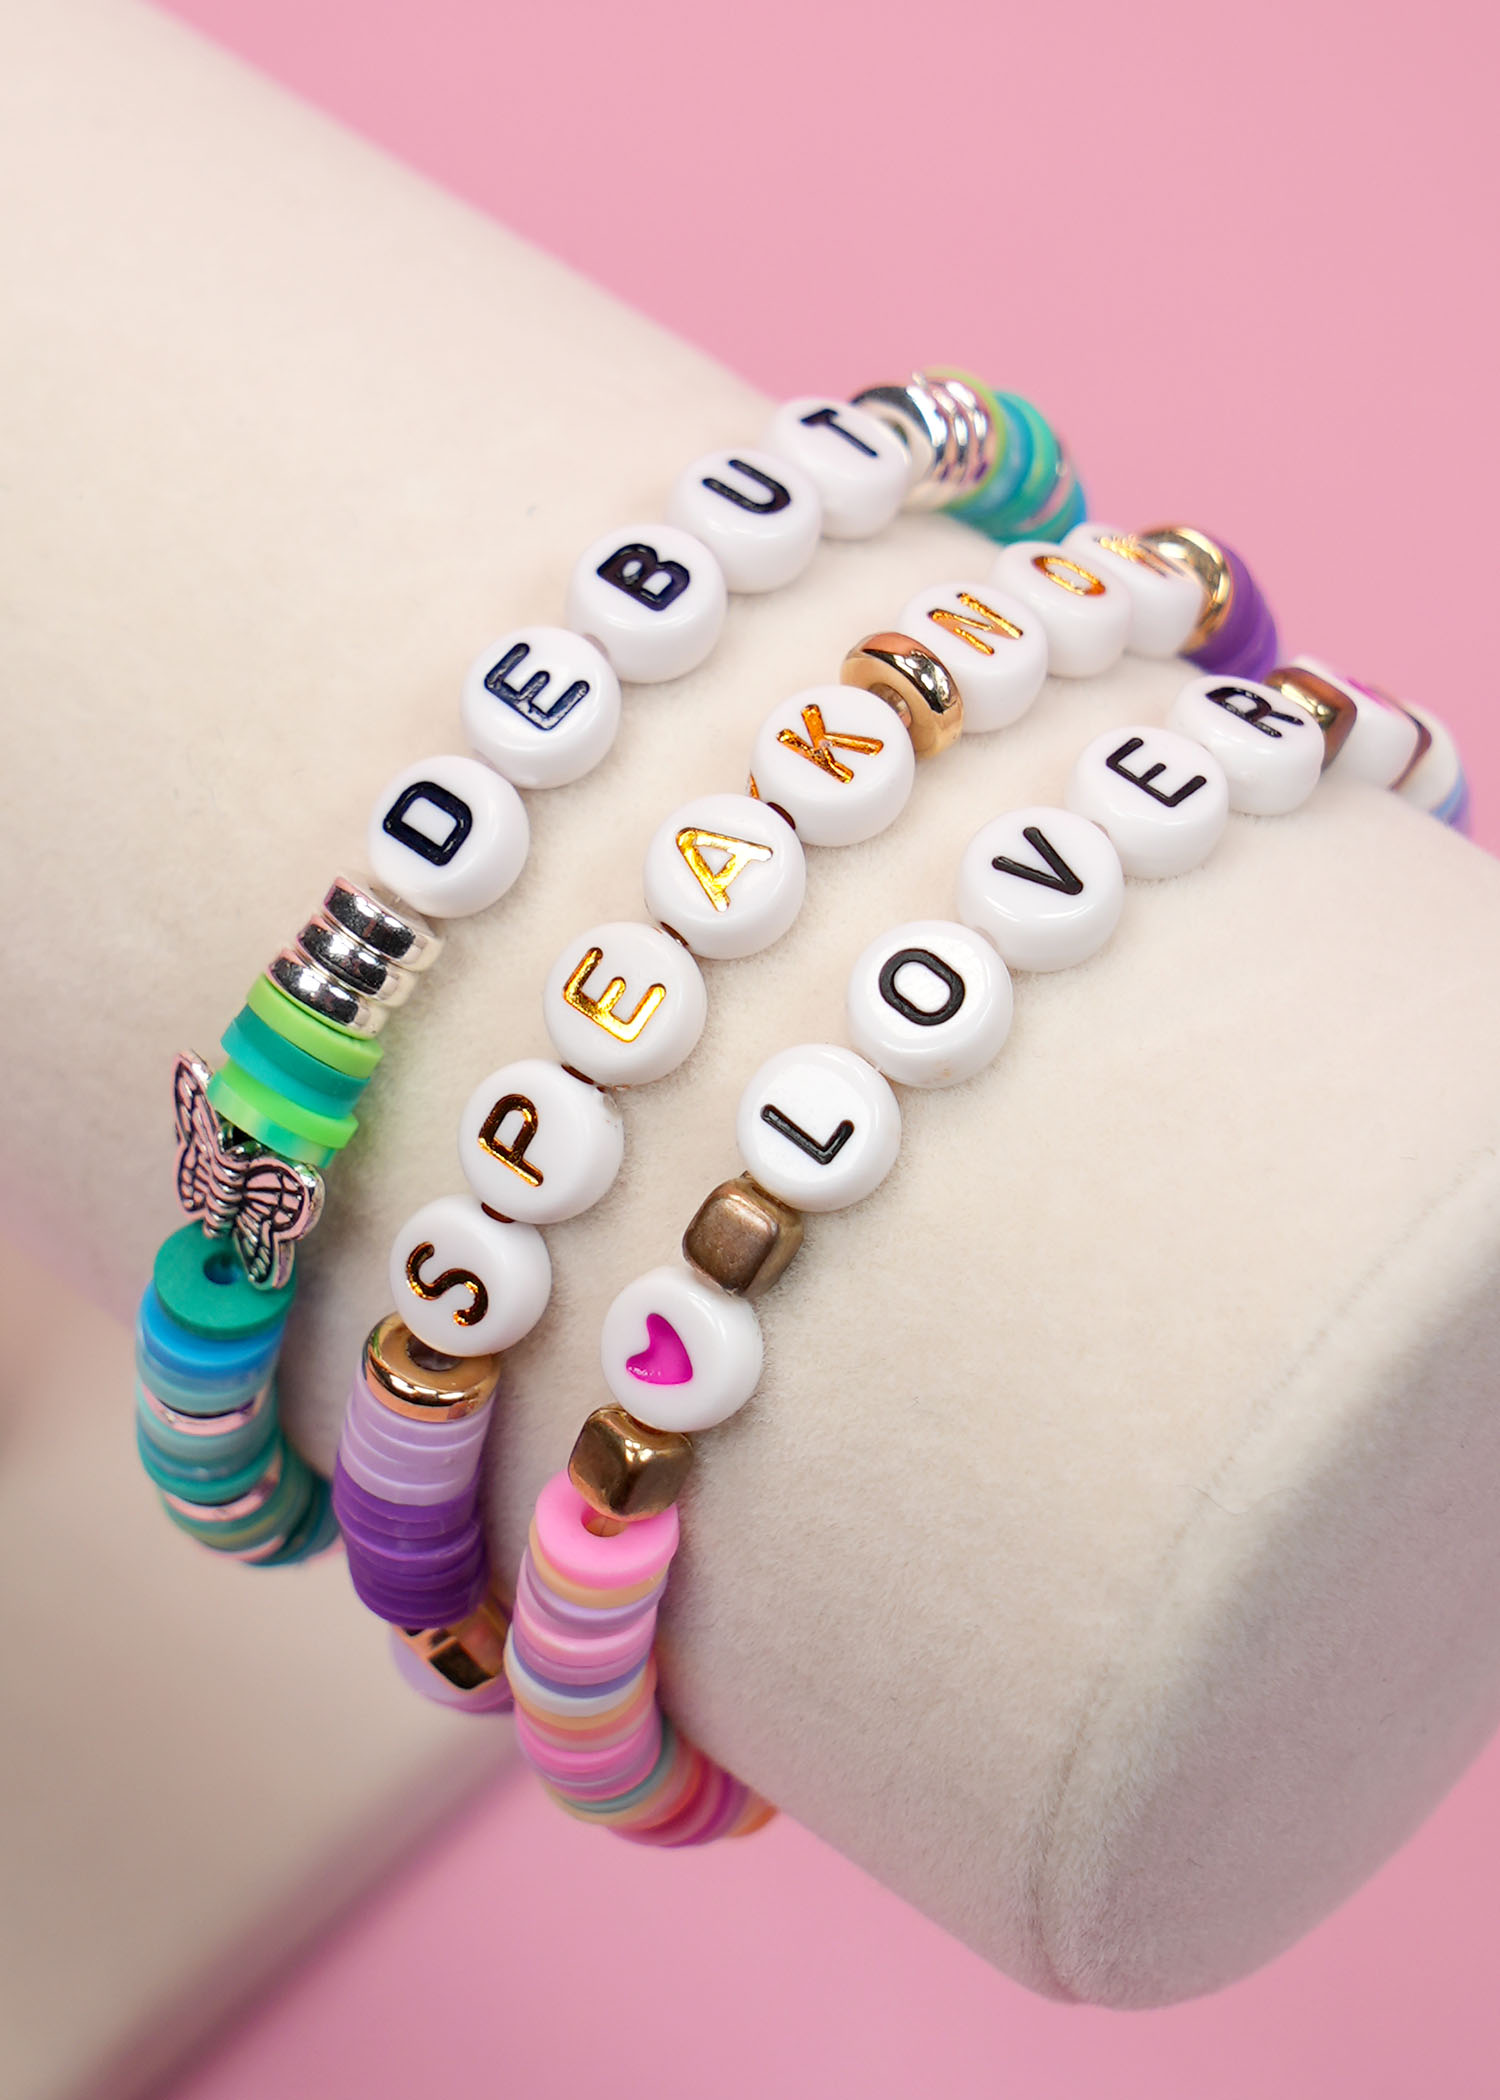 Beaded Friendship Bracelet, Personalize with Name or Word of Your Choice |  Kandi, Festival Bracelet | Ships fast from USA